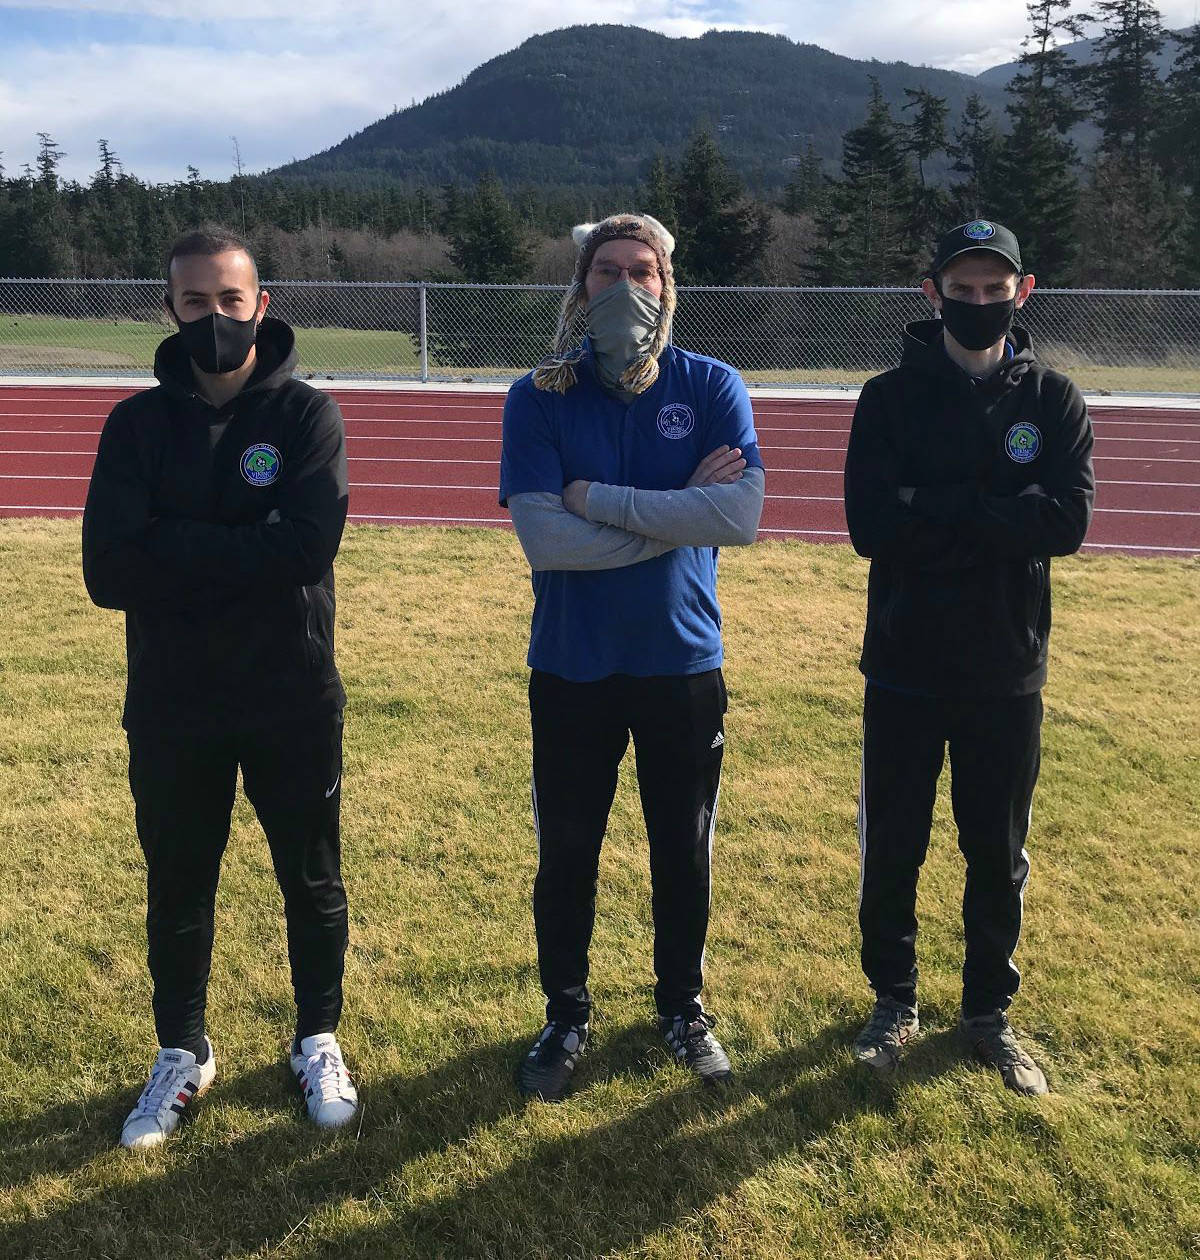 Contributed photo
Soccer coaches, left to right: Batu Balic, Terry Turner, Sidney Hayworth